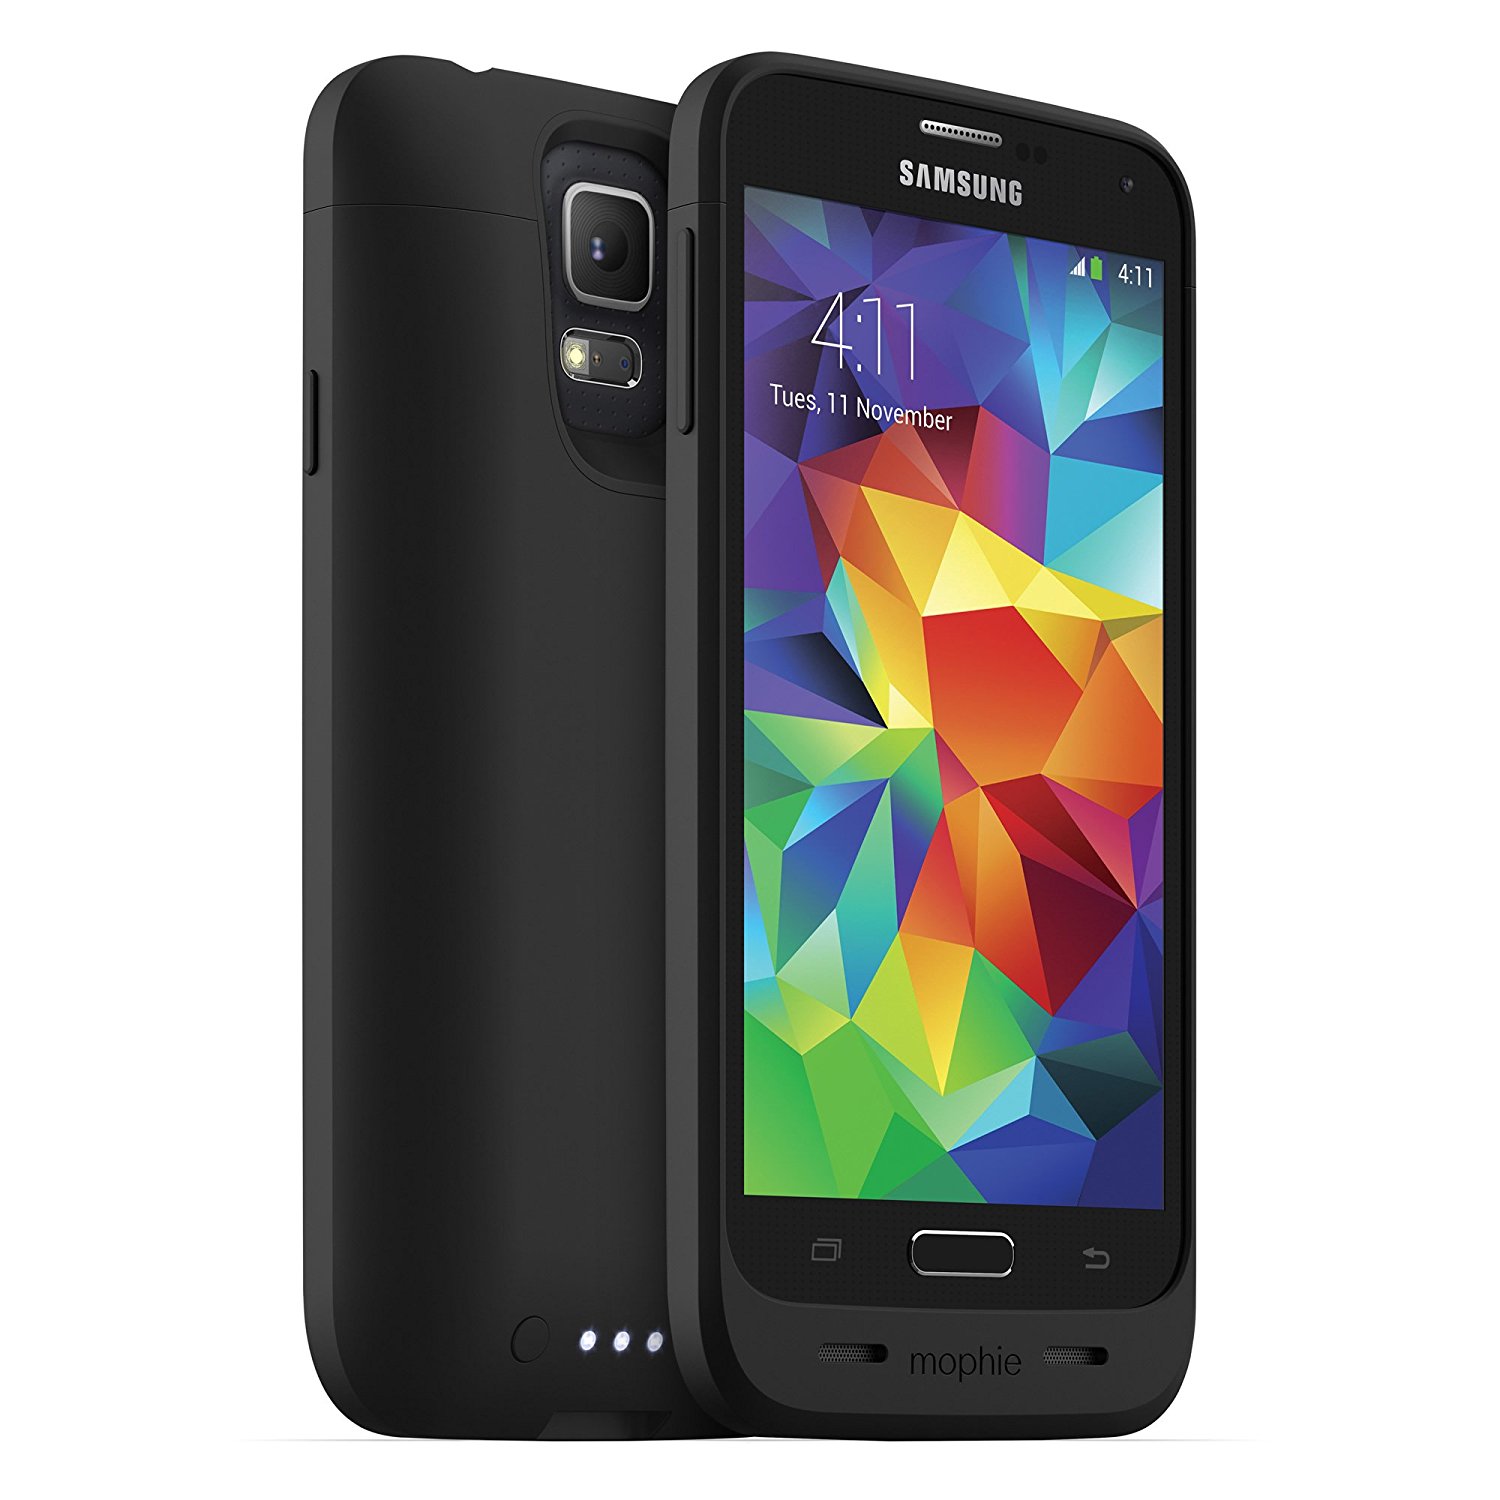 mophie juice pack for Samsung Galaxy S5 (3,000mAh) - Black ...